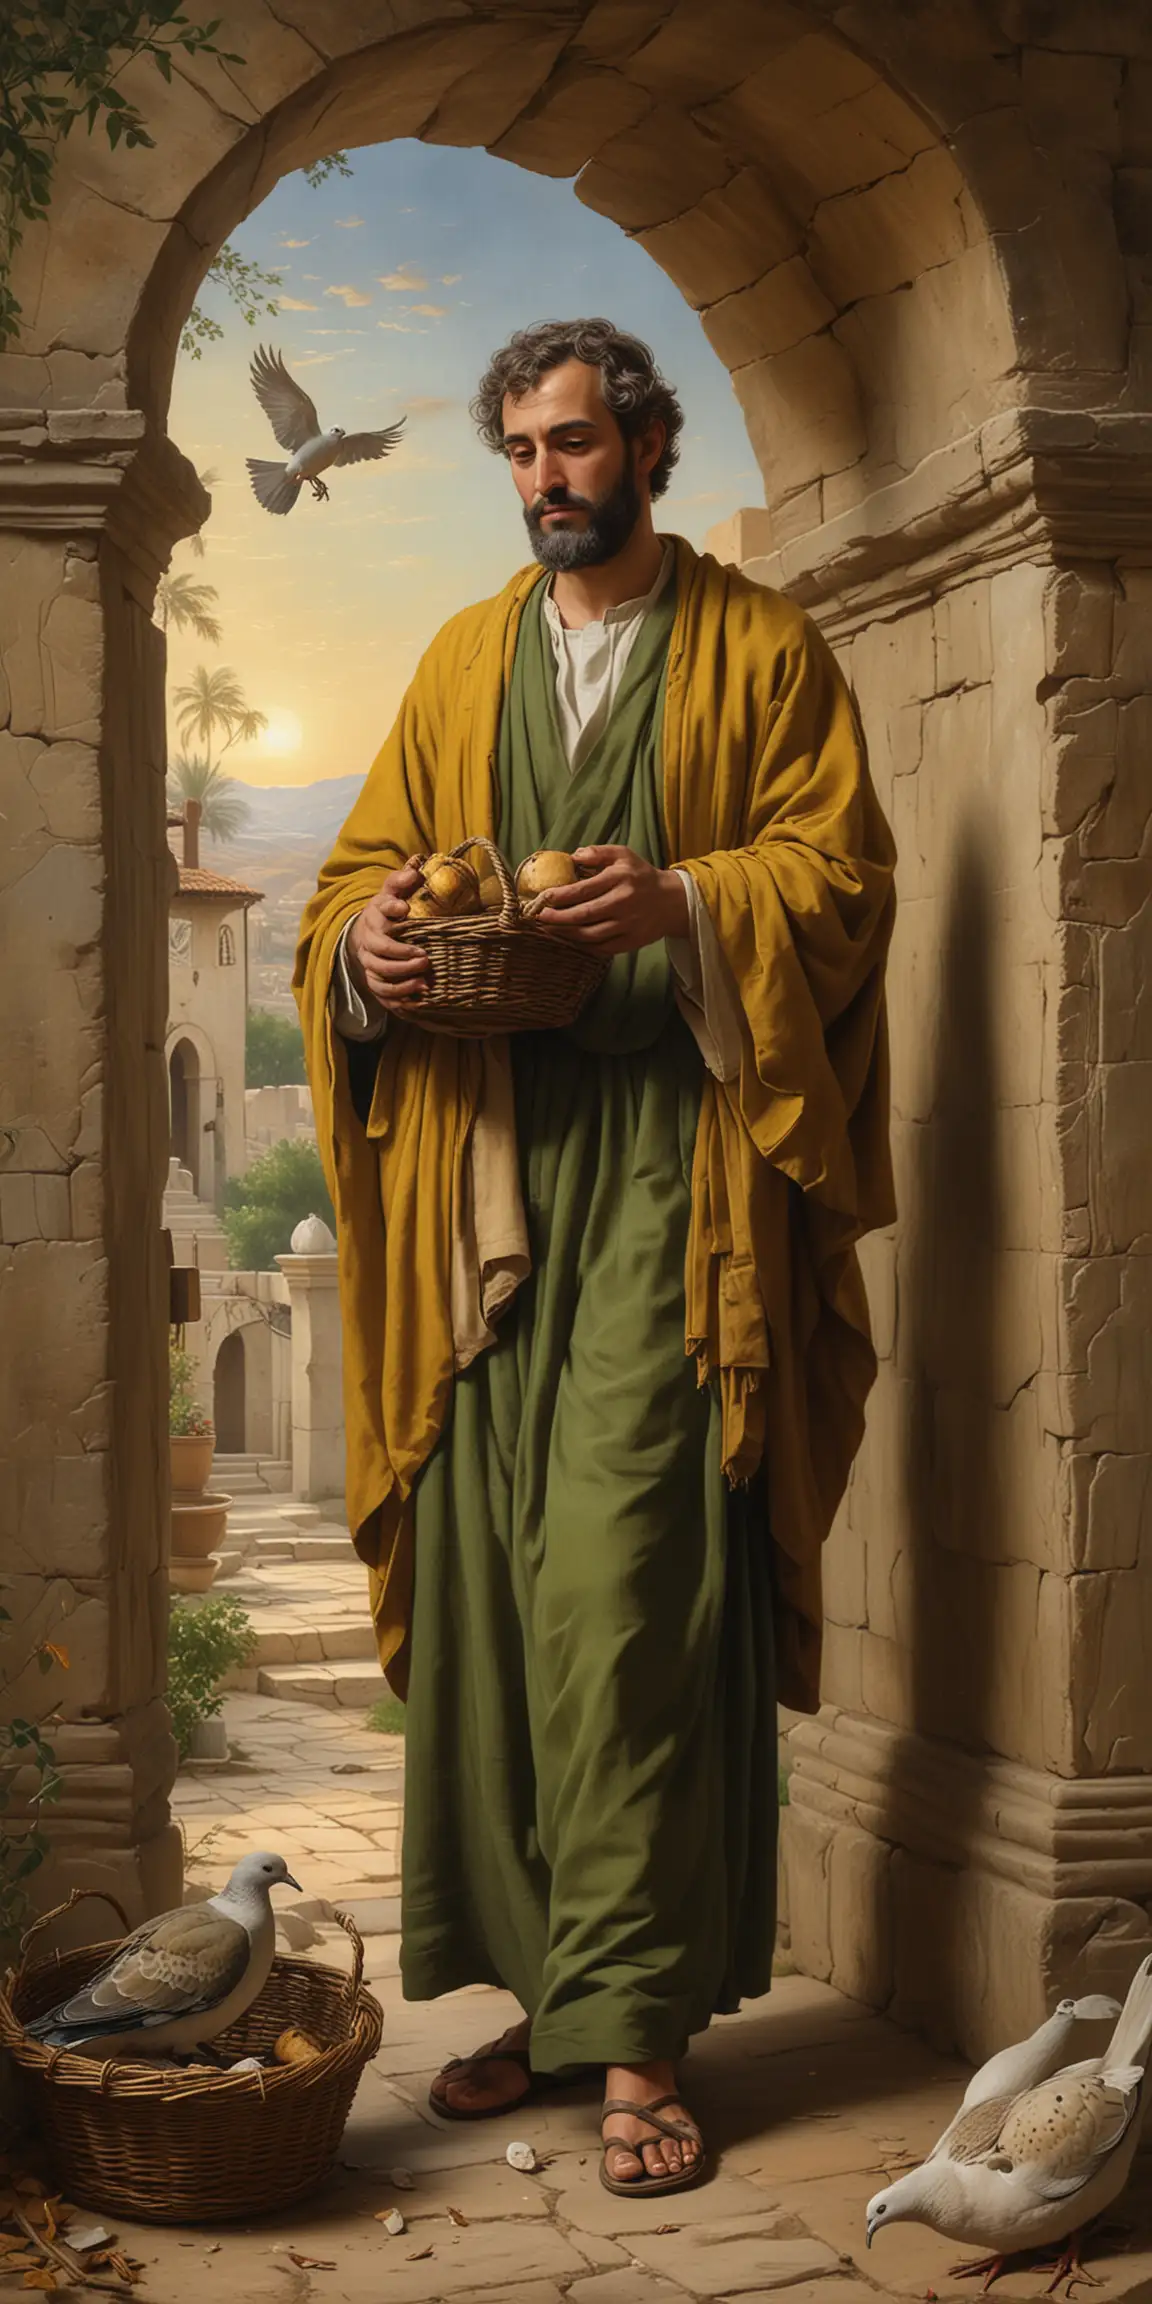 The painting depicts Saint Joseph. The scene is set within the temple, suggested by the arched stone doorway and the worn stone walls.

Central Figure

Saint Joseph: We are seeing the left-side-view of Saint Joseph who is a very handsome young man in his early thirties with short black curly hair and a short black beard, standing wearing sandals, wearing a dark yellow mantle over a green robe. He holds two turtledoves in a low wicker basket in one hand and a staff in the other hand.

Additional Details: 
The Temple Setting: The background features a group of men, possibly other priests or Levites, observing the event. The warm, earthy tones of the painting and the play of light and shadow create a sense of solemnity and reverence.
Symbolism:  The turtledoves held by Joseph symbolize sacrifice and purification.
Overall Impression:

The painting captures the emotional intensity and spiritual significance of the subject The expression of the figure, the symbolism, and the setting all contribute to a powerful depiction of this pivotal event.